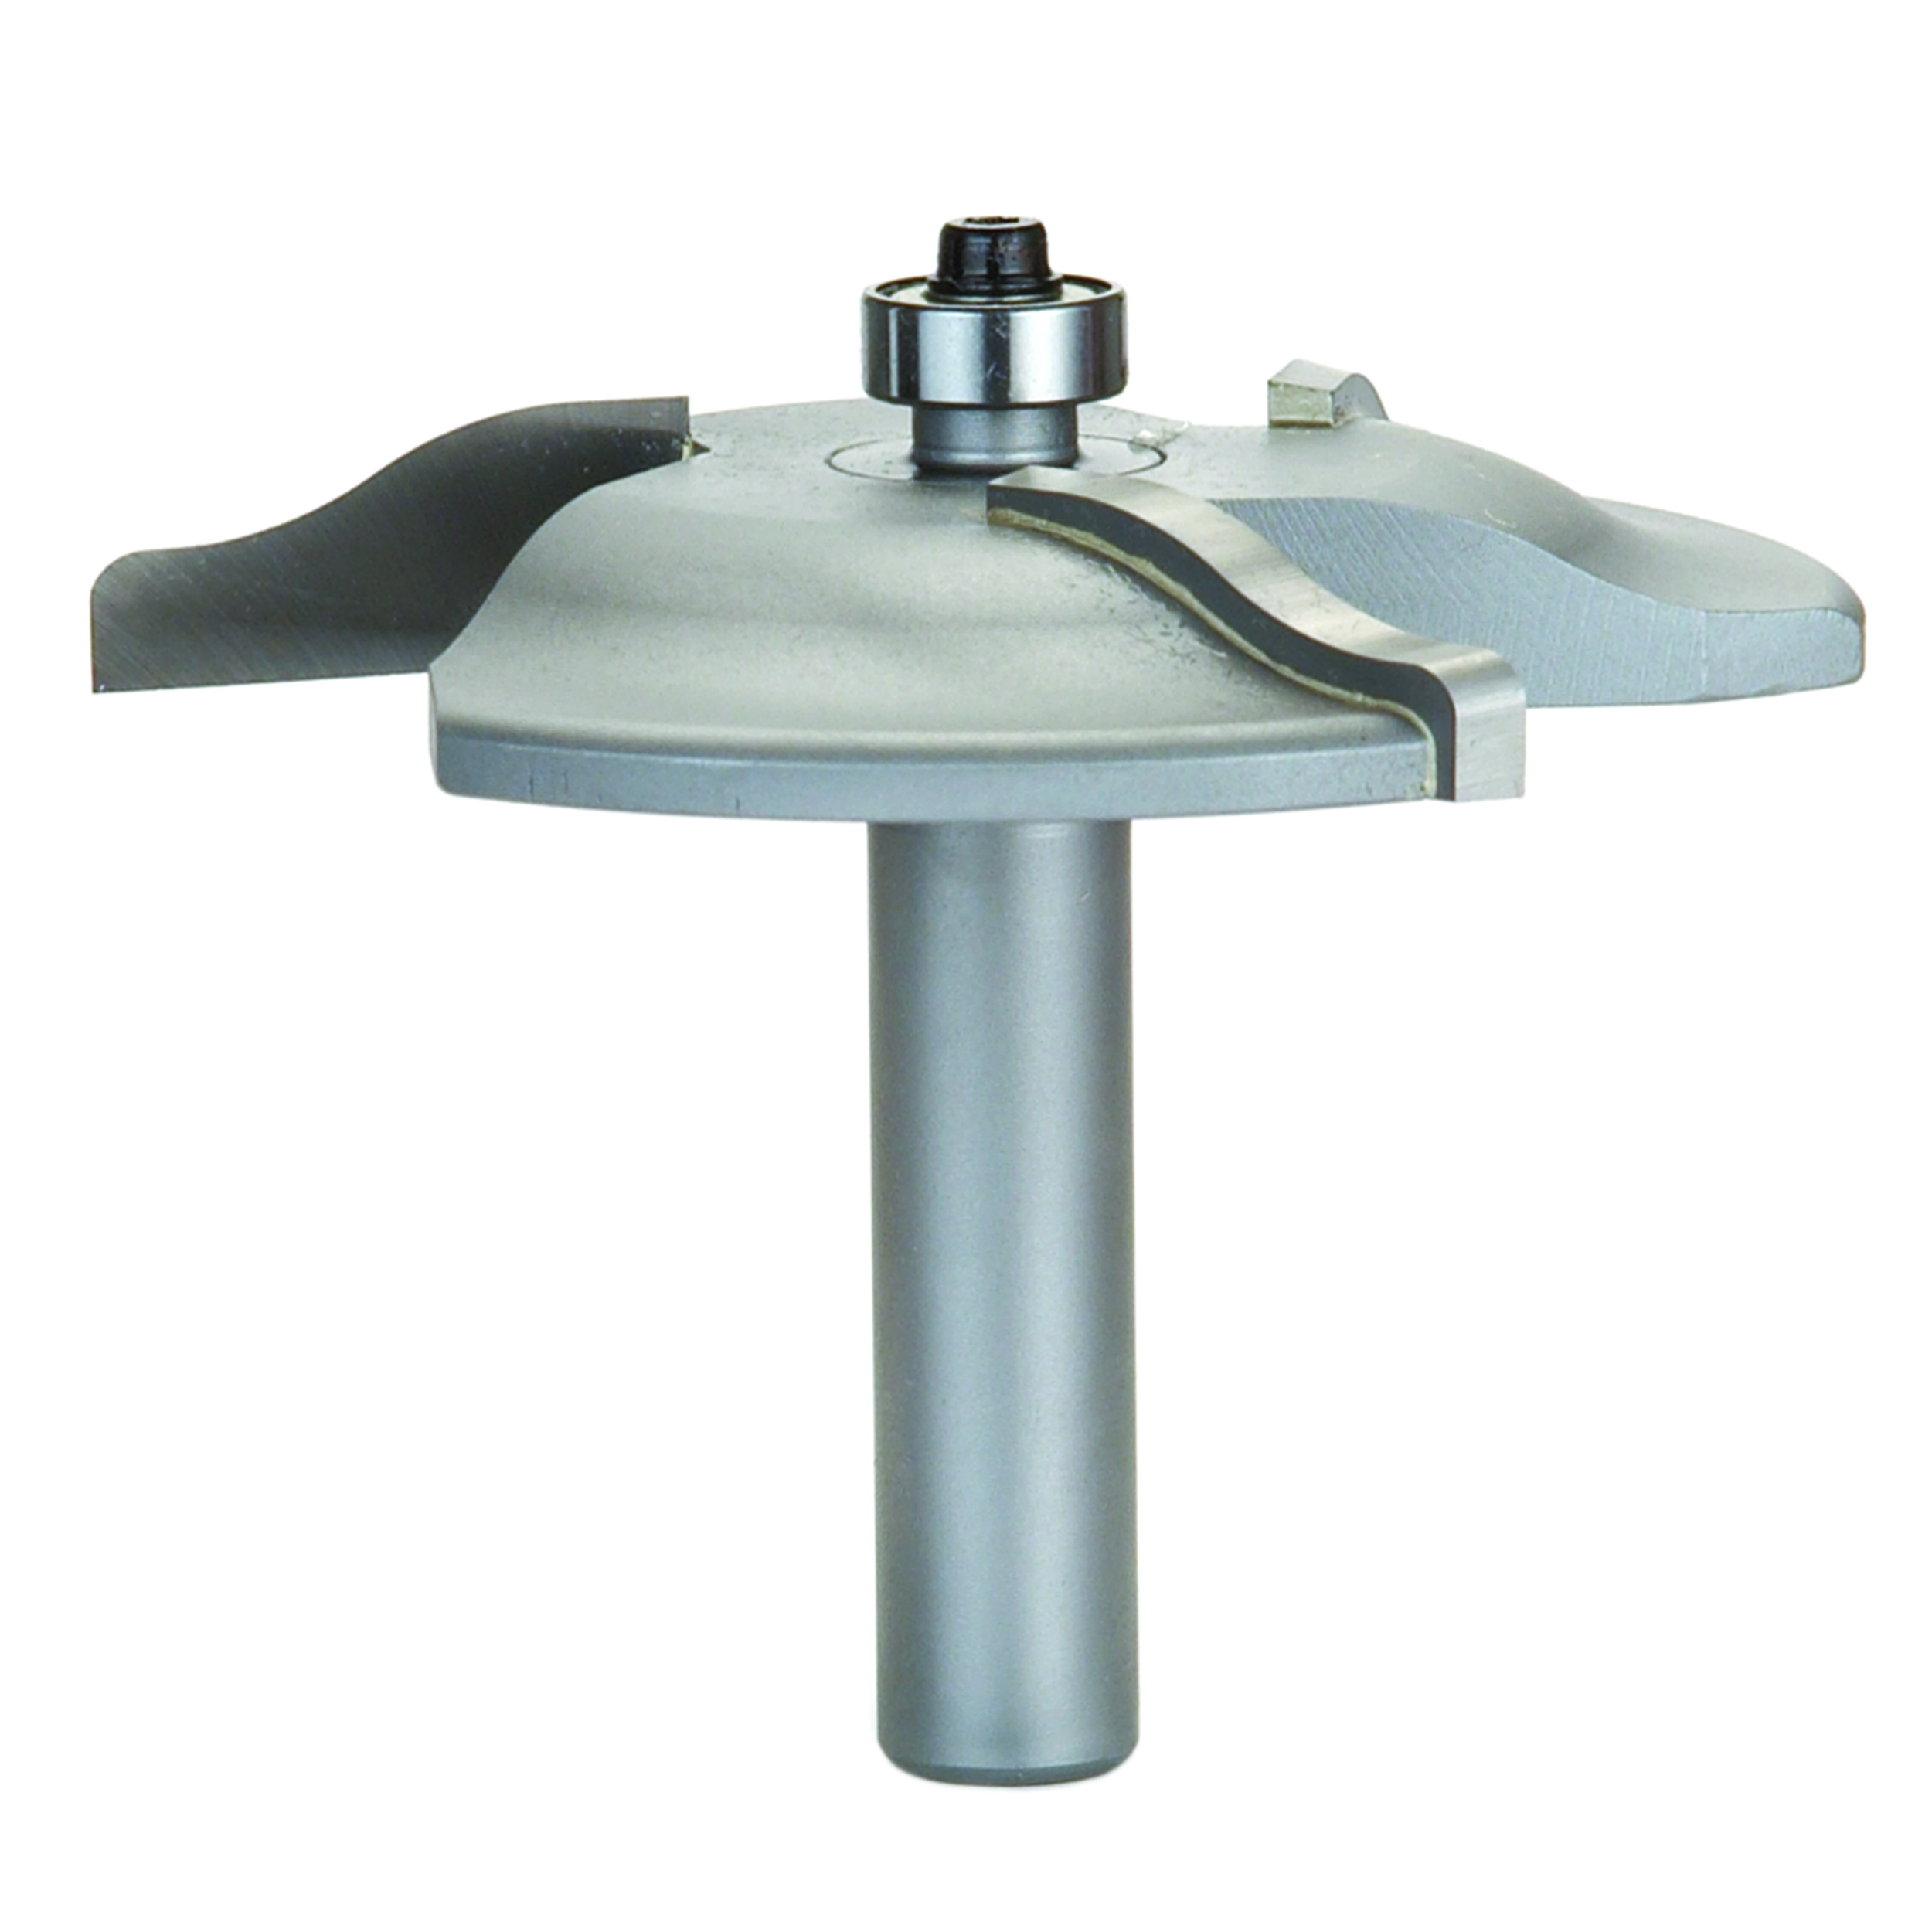 6000c 3-wing Large Raised Panel Router Bit 3-3/8" D, Ogee Cove